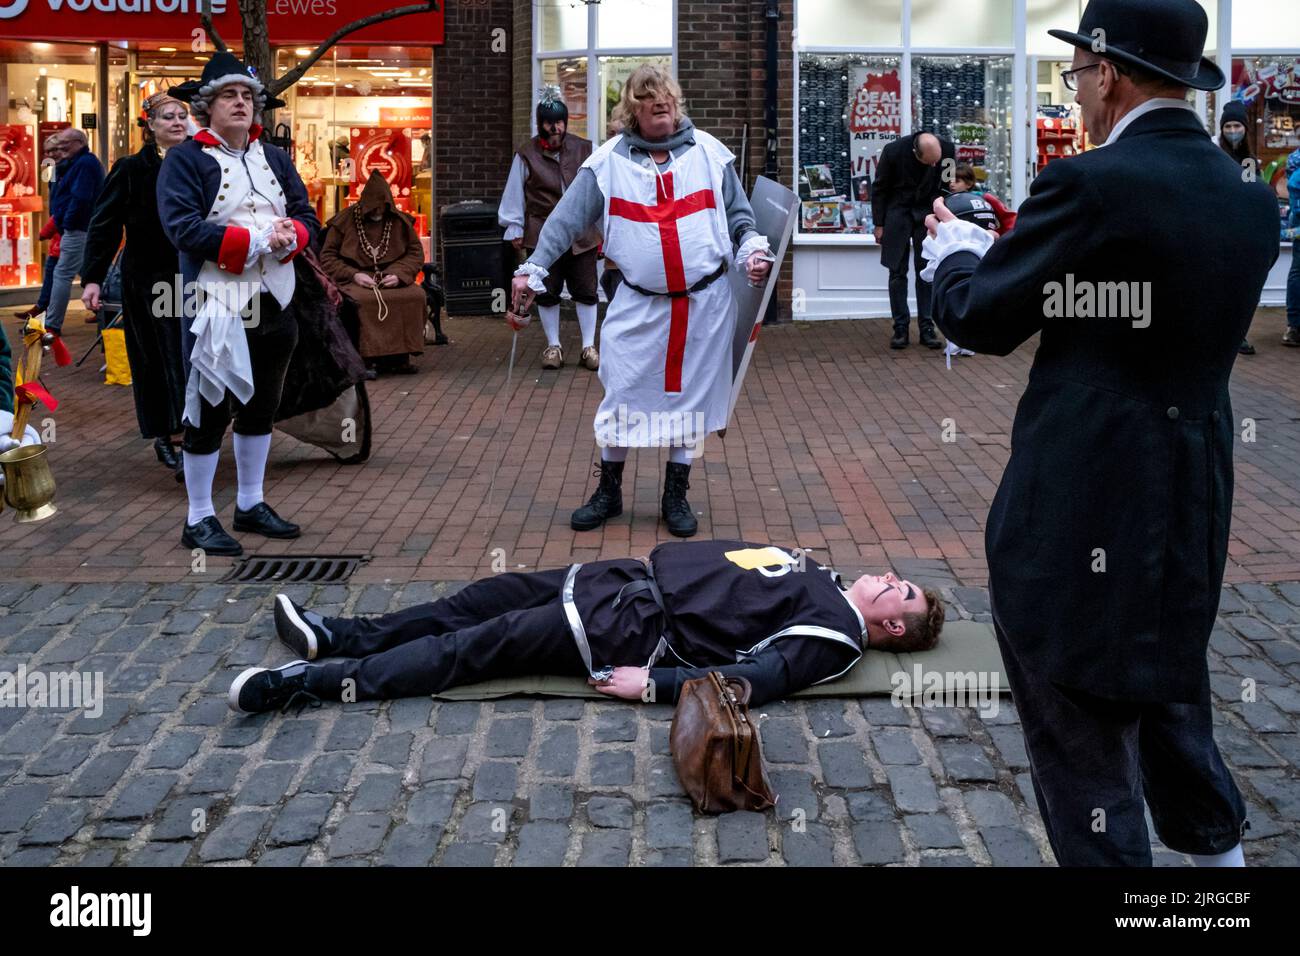 Sompting Village Morris Men Perform A Traditional Mummers Play In The High Street, Lewes, East Sussex, UK. Stock Photo